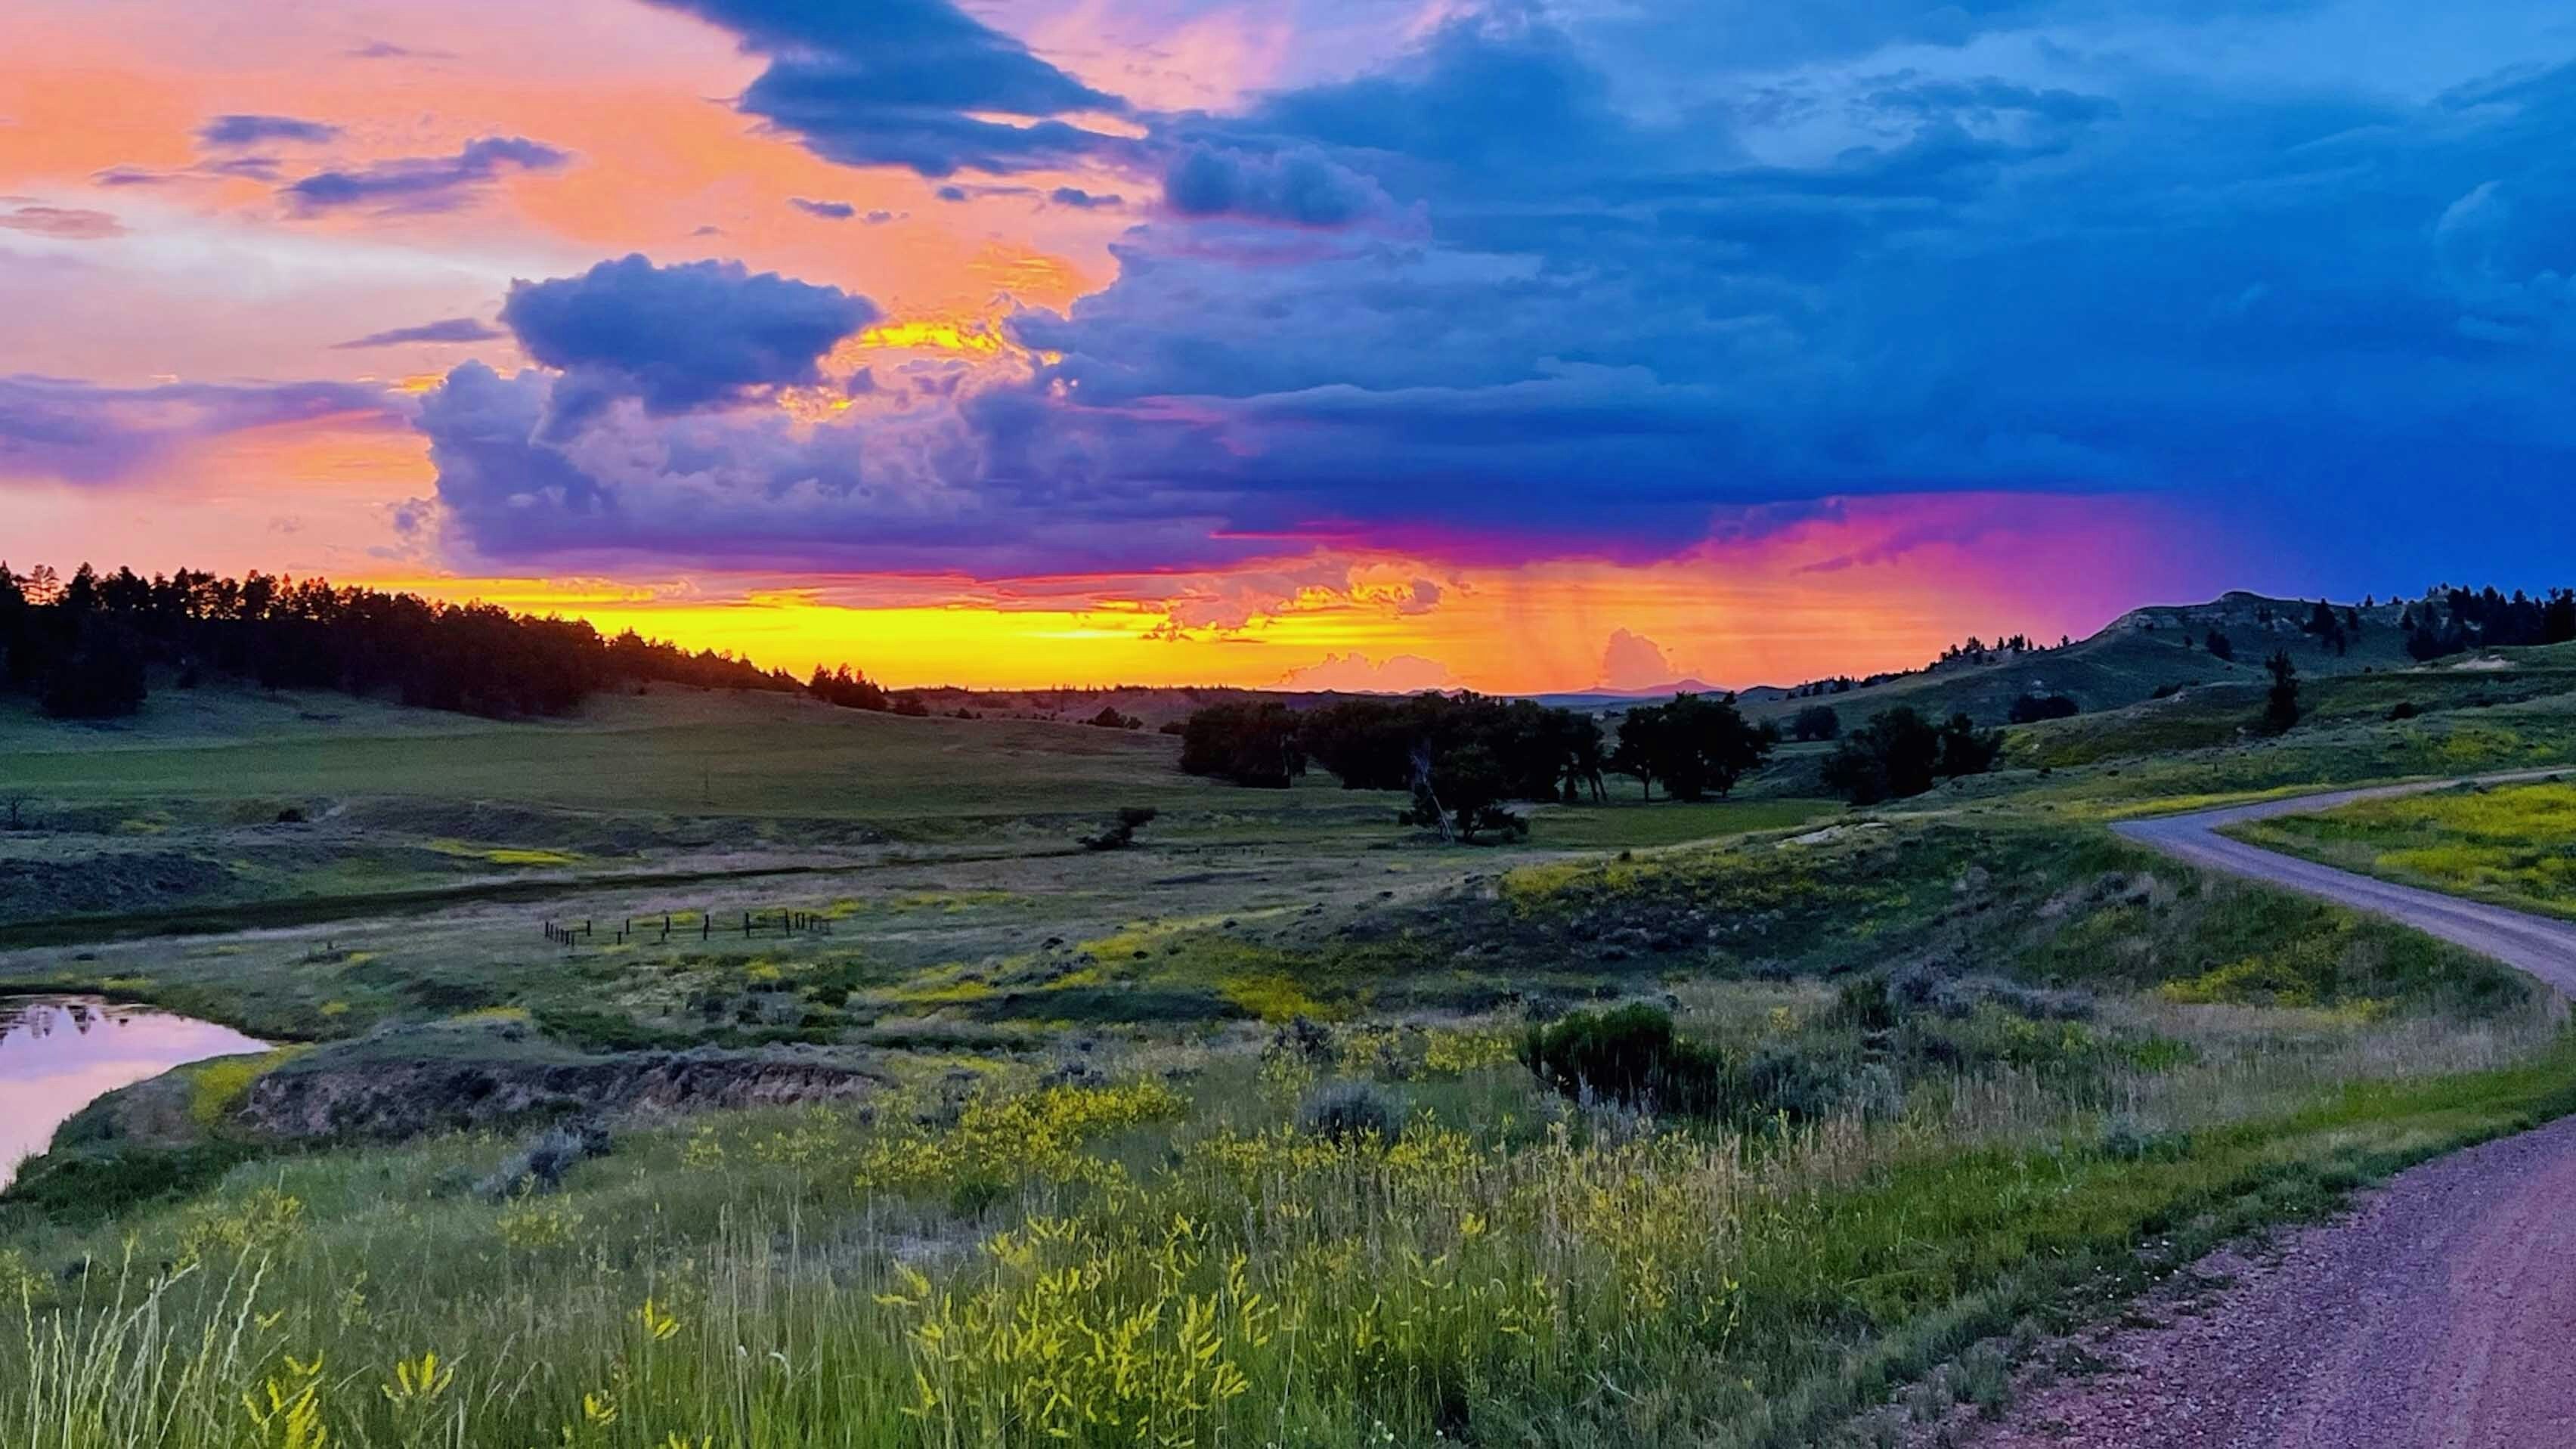 Sunset on June 29, 2023 at Sweetgrass Ranch outside the unincorporated town of Weston, Wyoming.